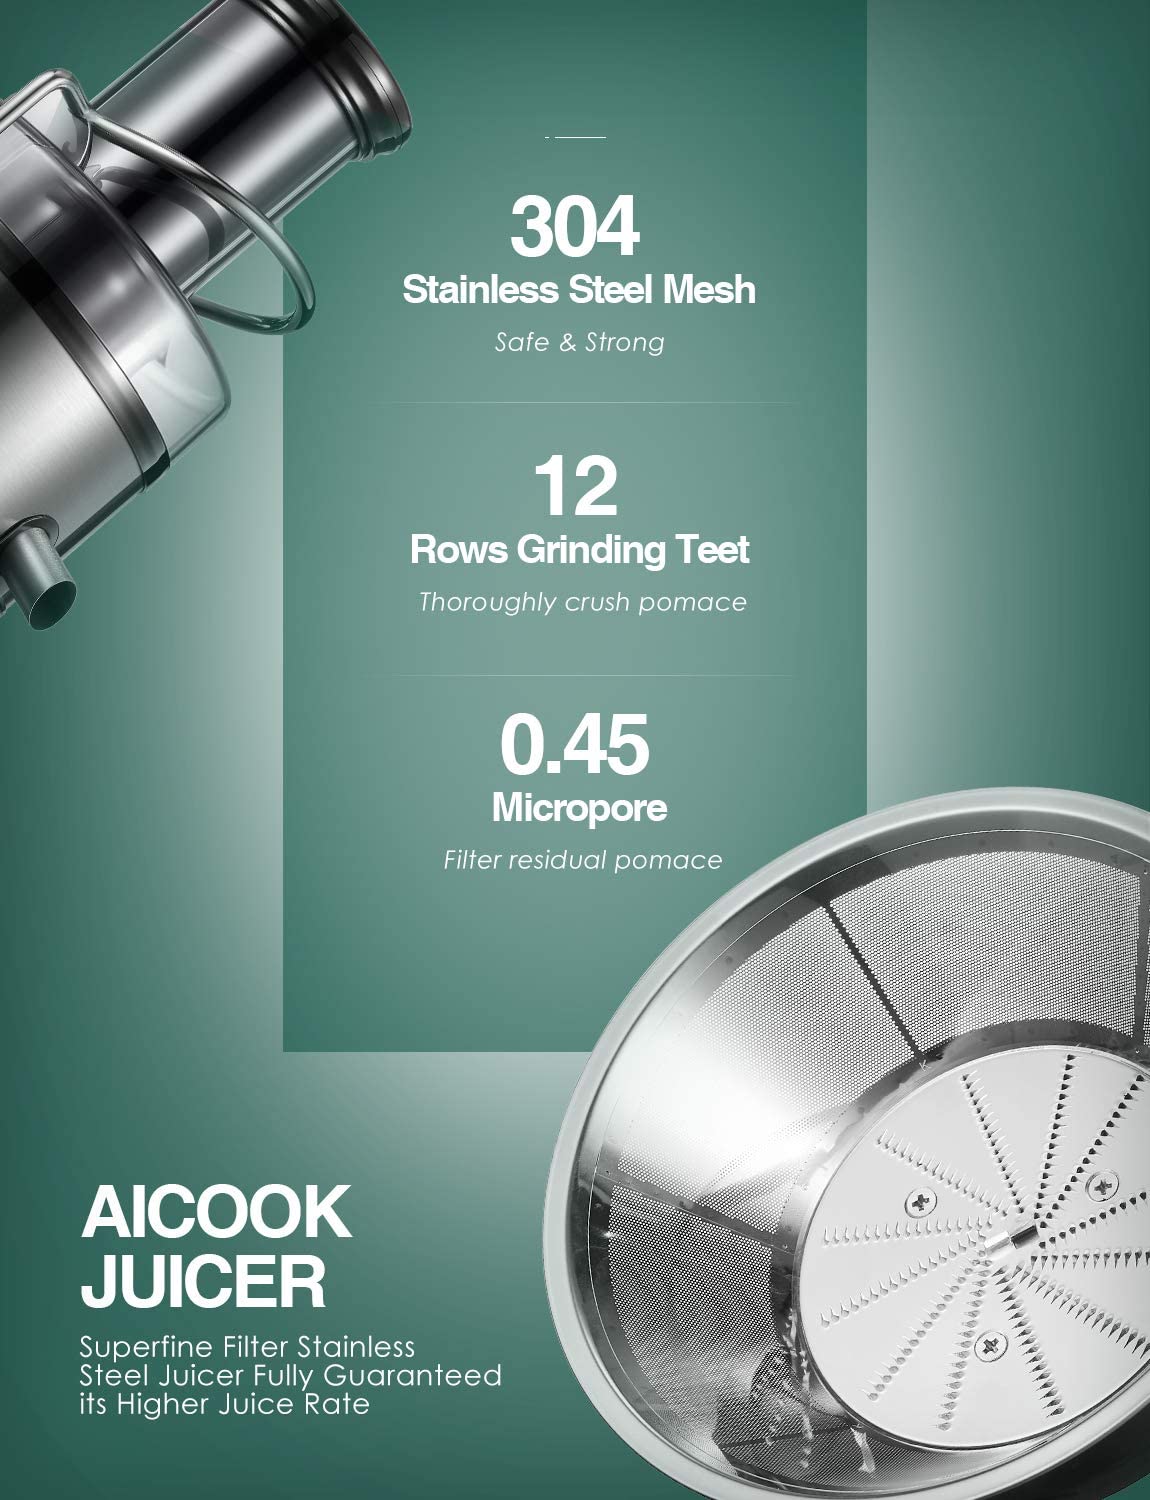 Aicook | Centrifugal Juicer Machines, 800W Juice and Vegetable Extractor 5-Speed Touch Screen, 3.1'' Big Mouth, Quiet Motor, Non-Slip Feet